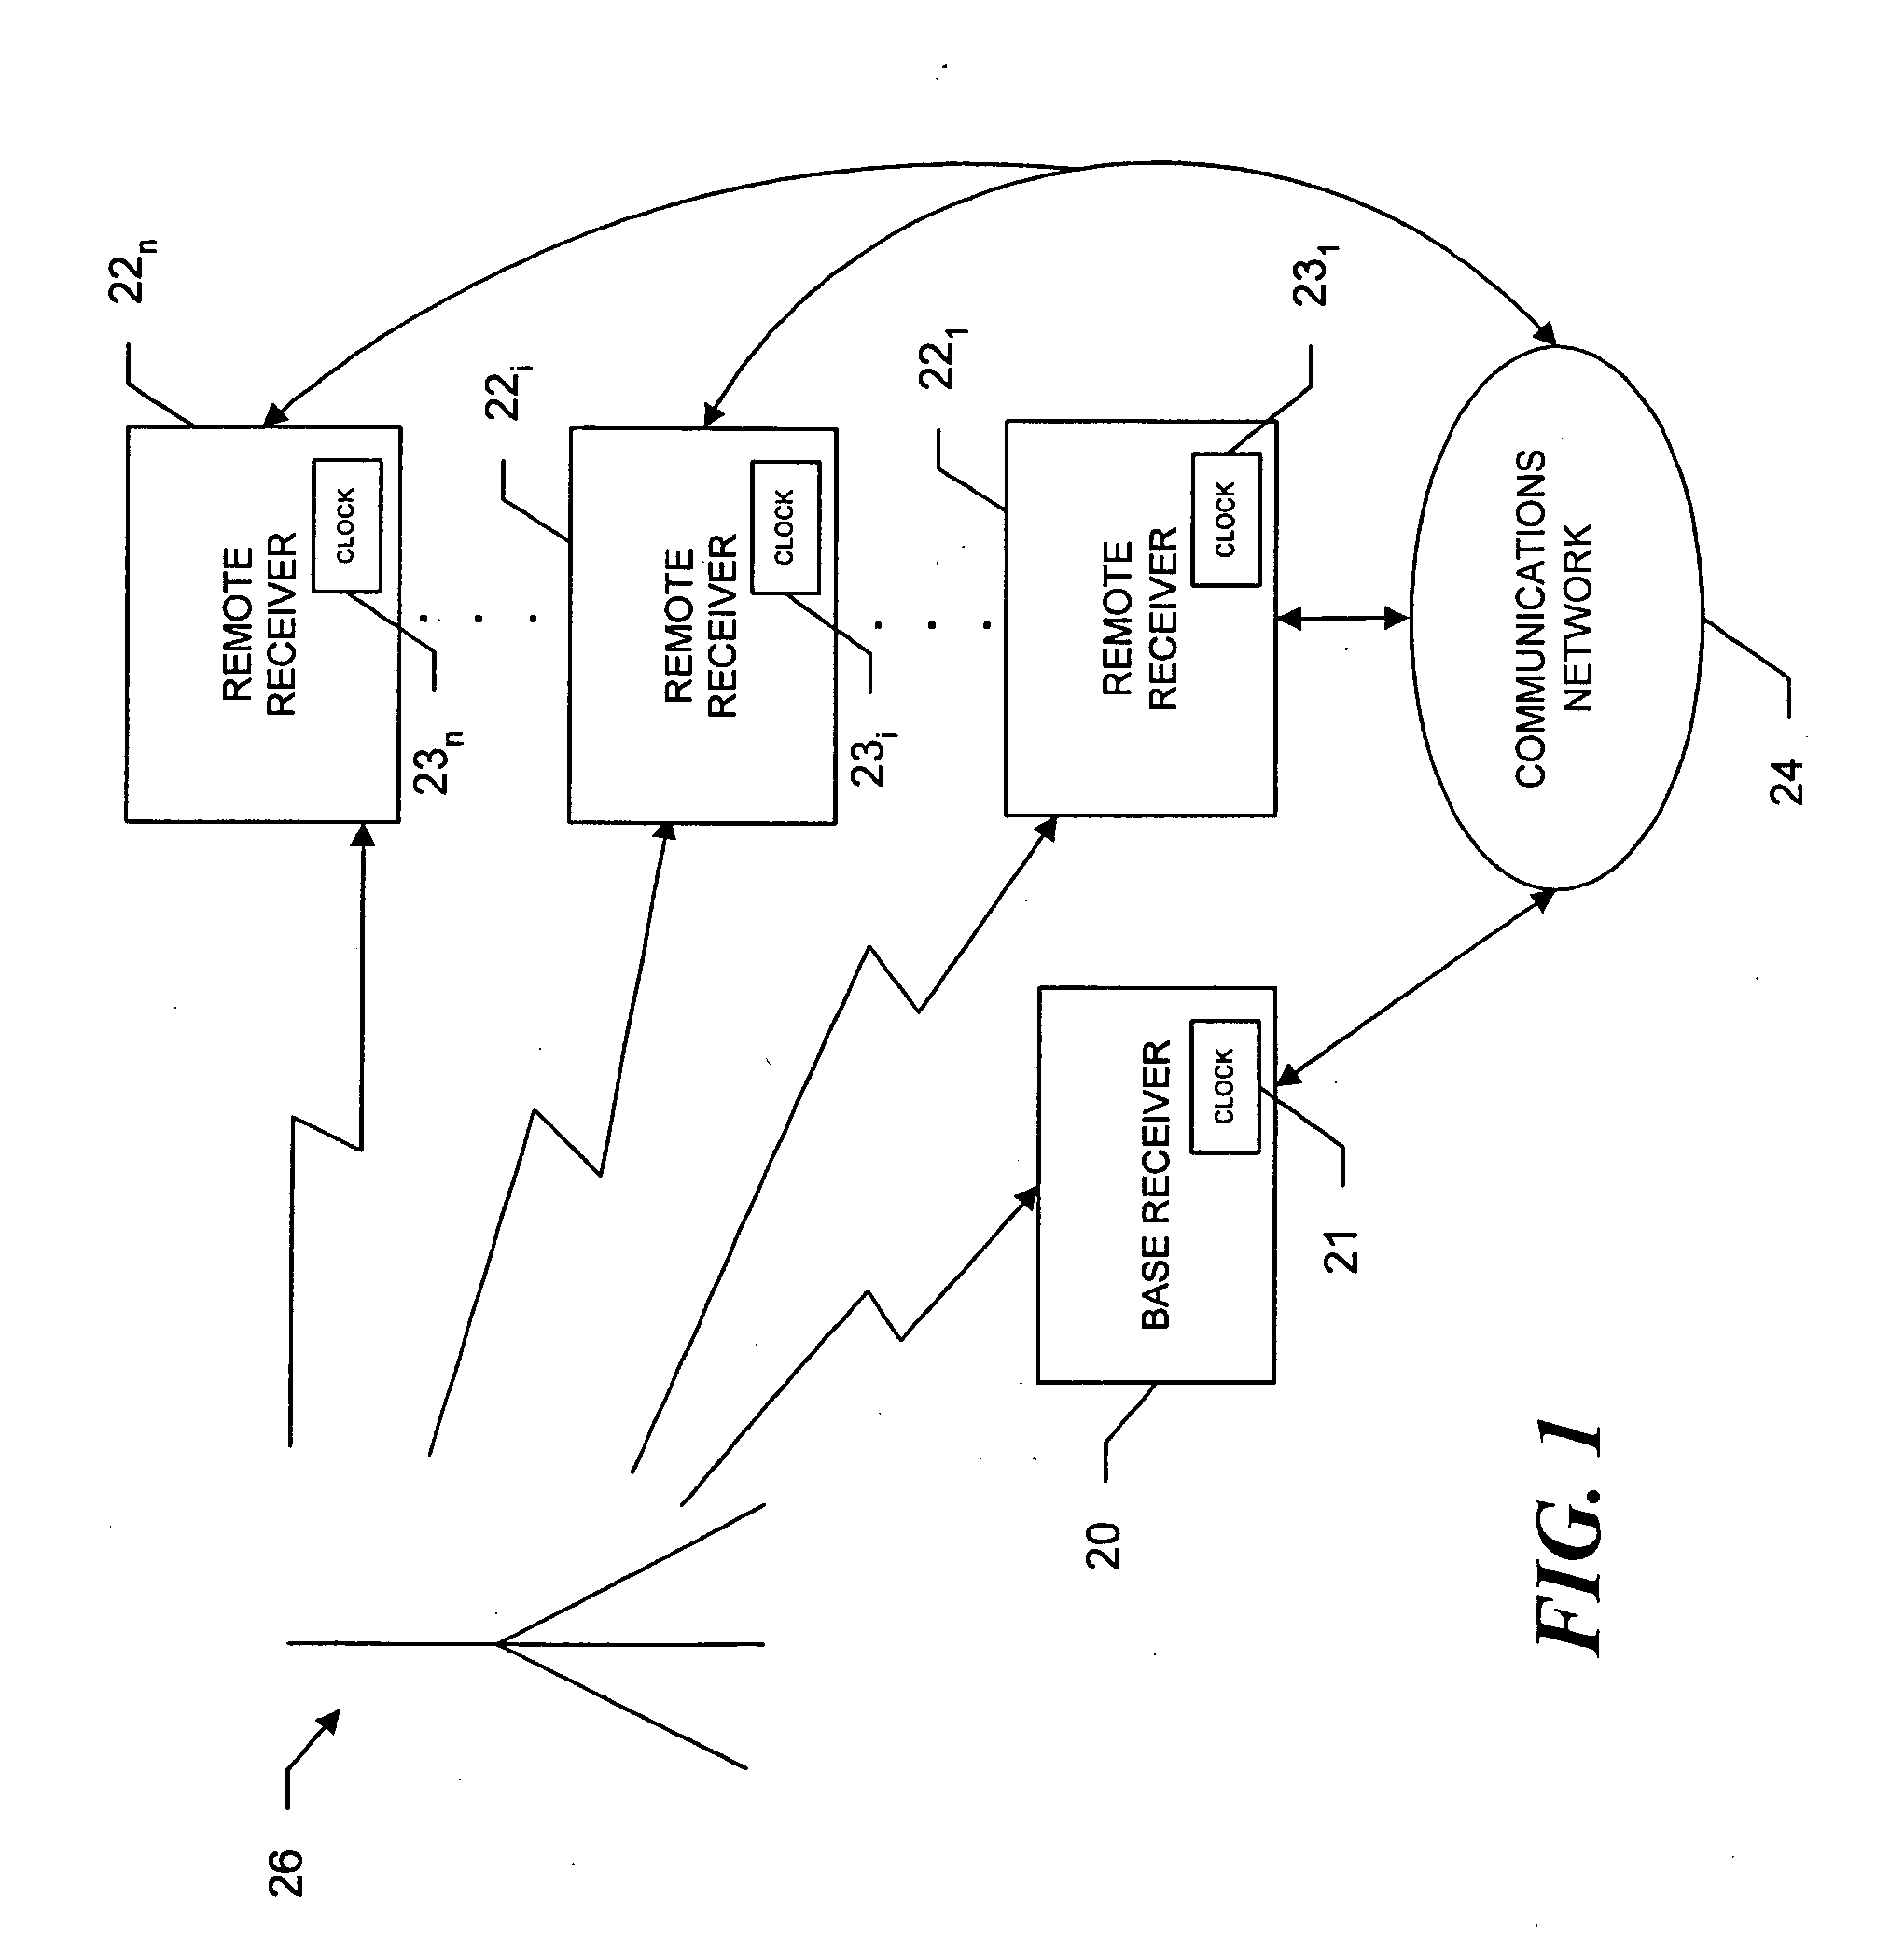 System and method for distributing time and frequency over a network